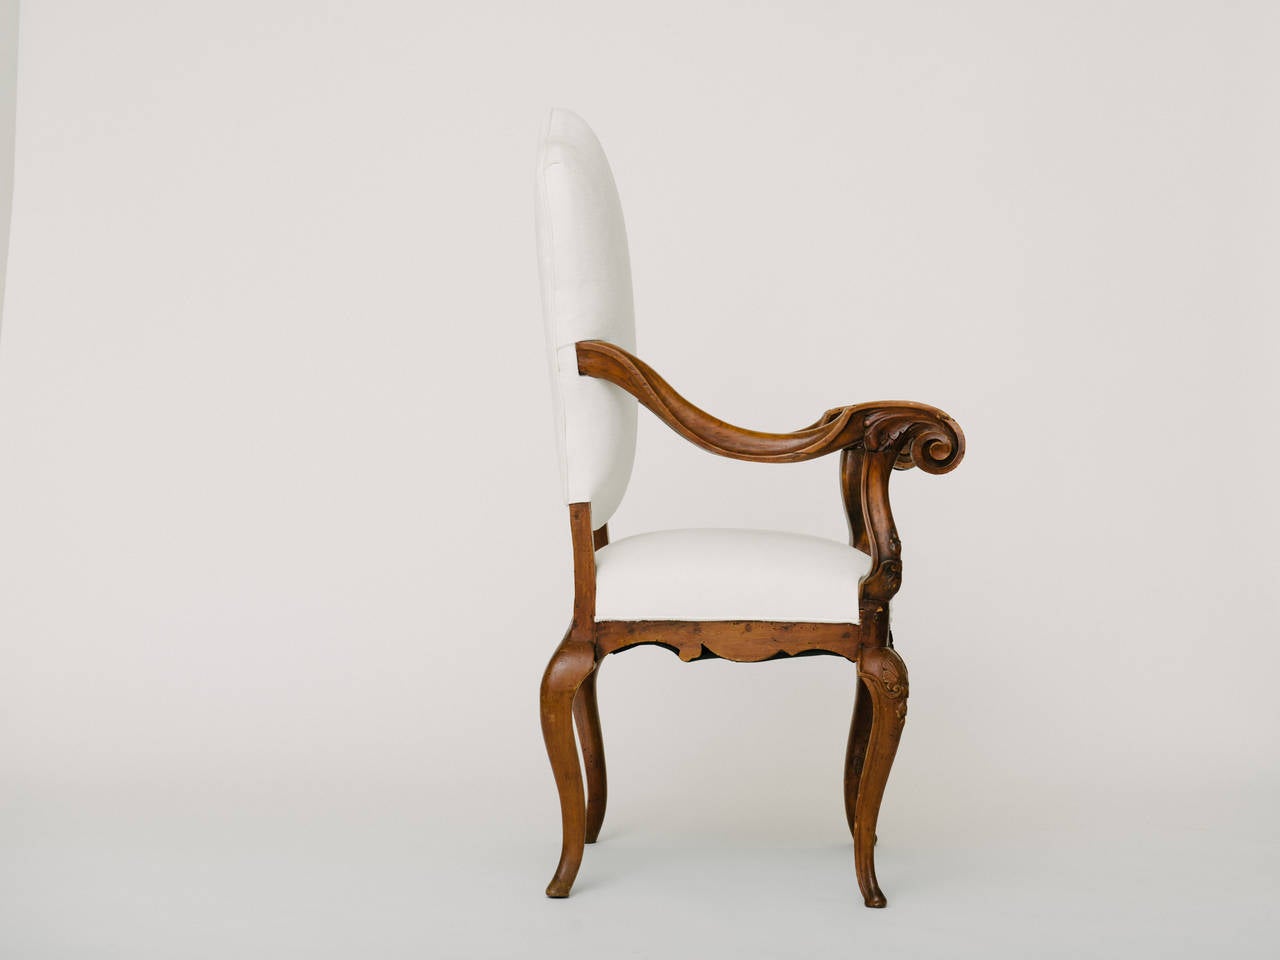 18th century French fauteuil with beautifully carved scroll arms and shell detail. Newly upholstered in crisp white.